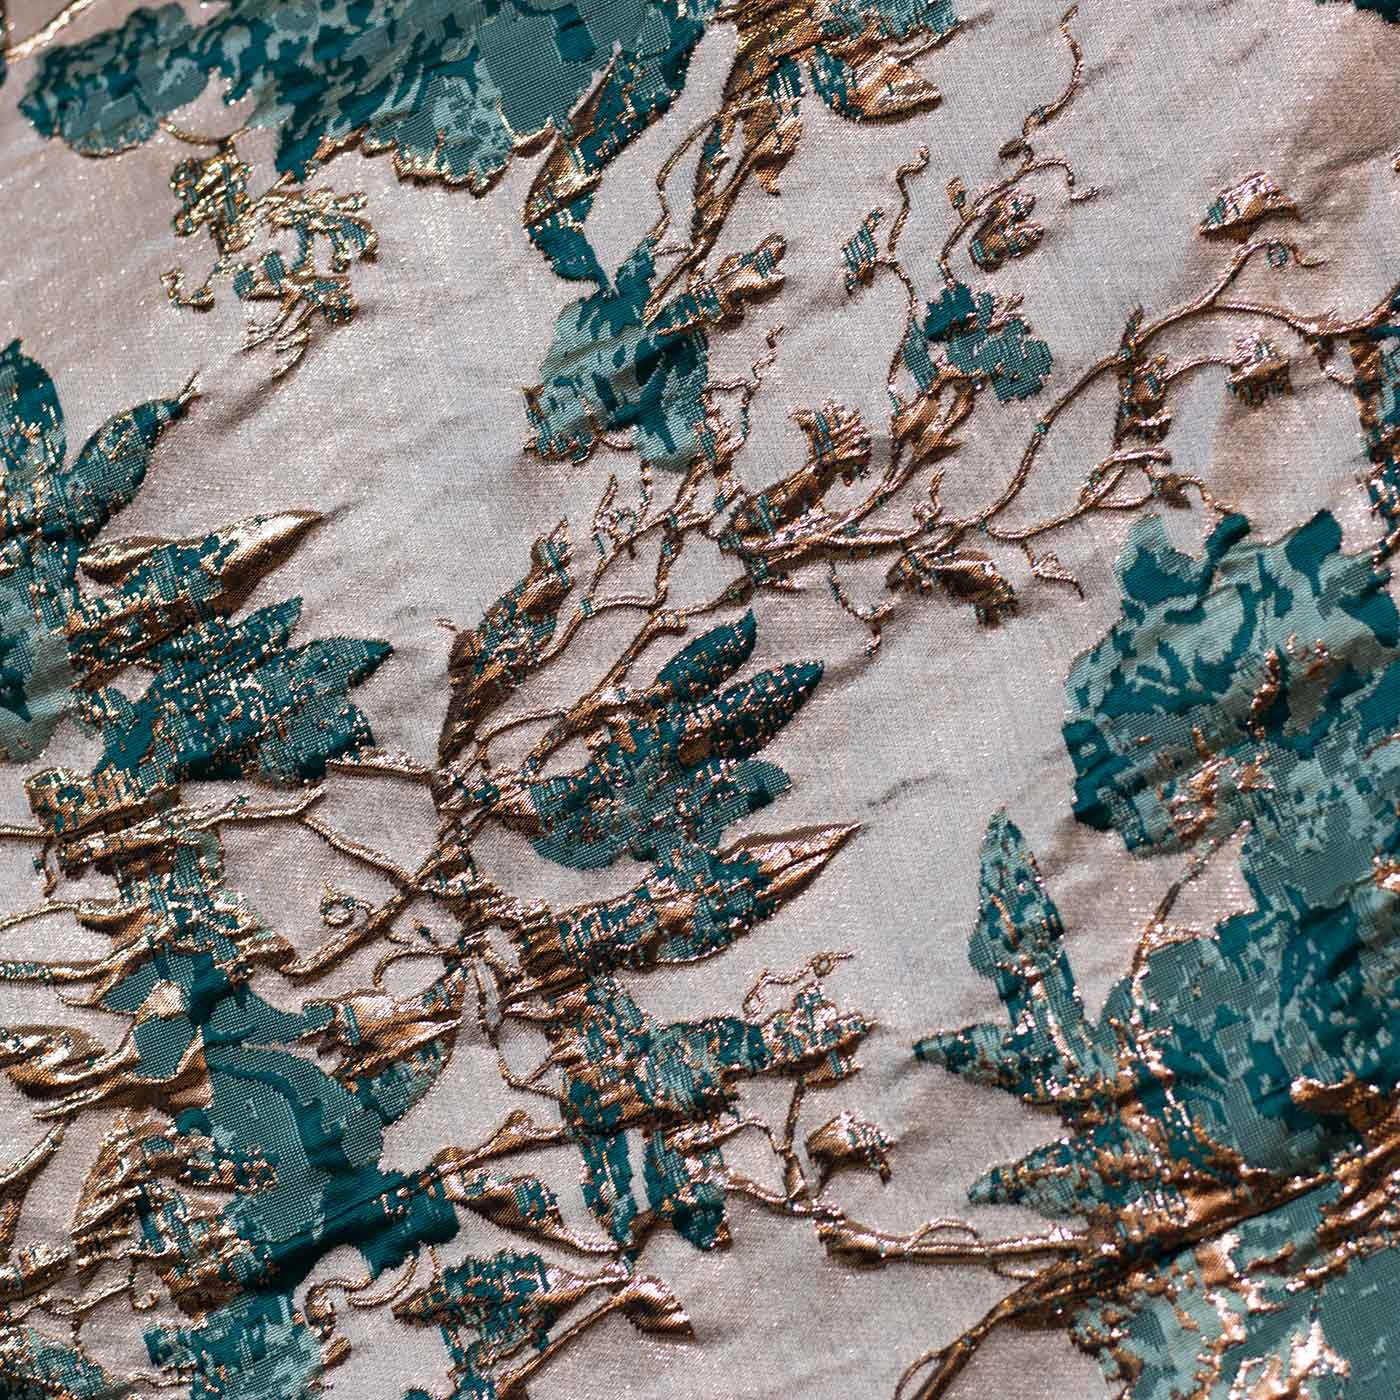 Teal and Cream Floral Brocade Fabric